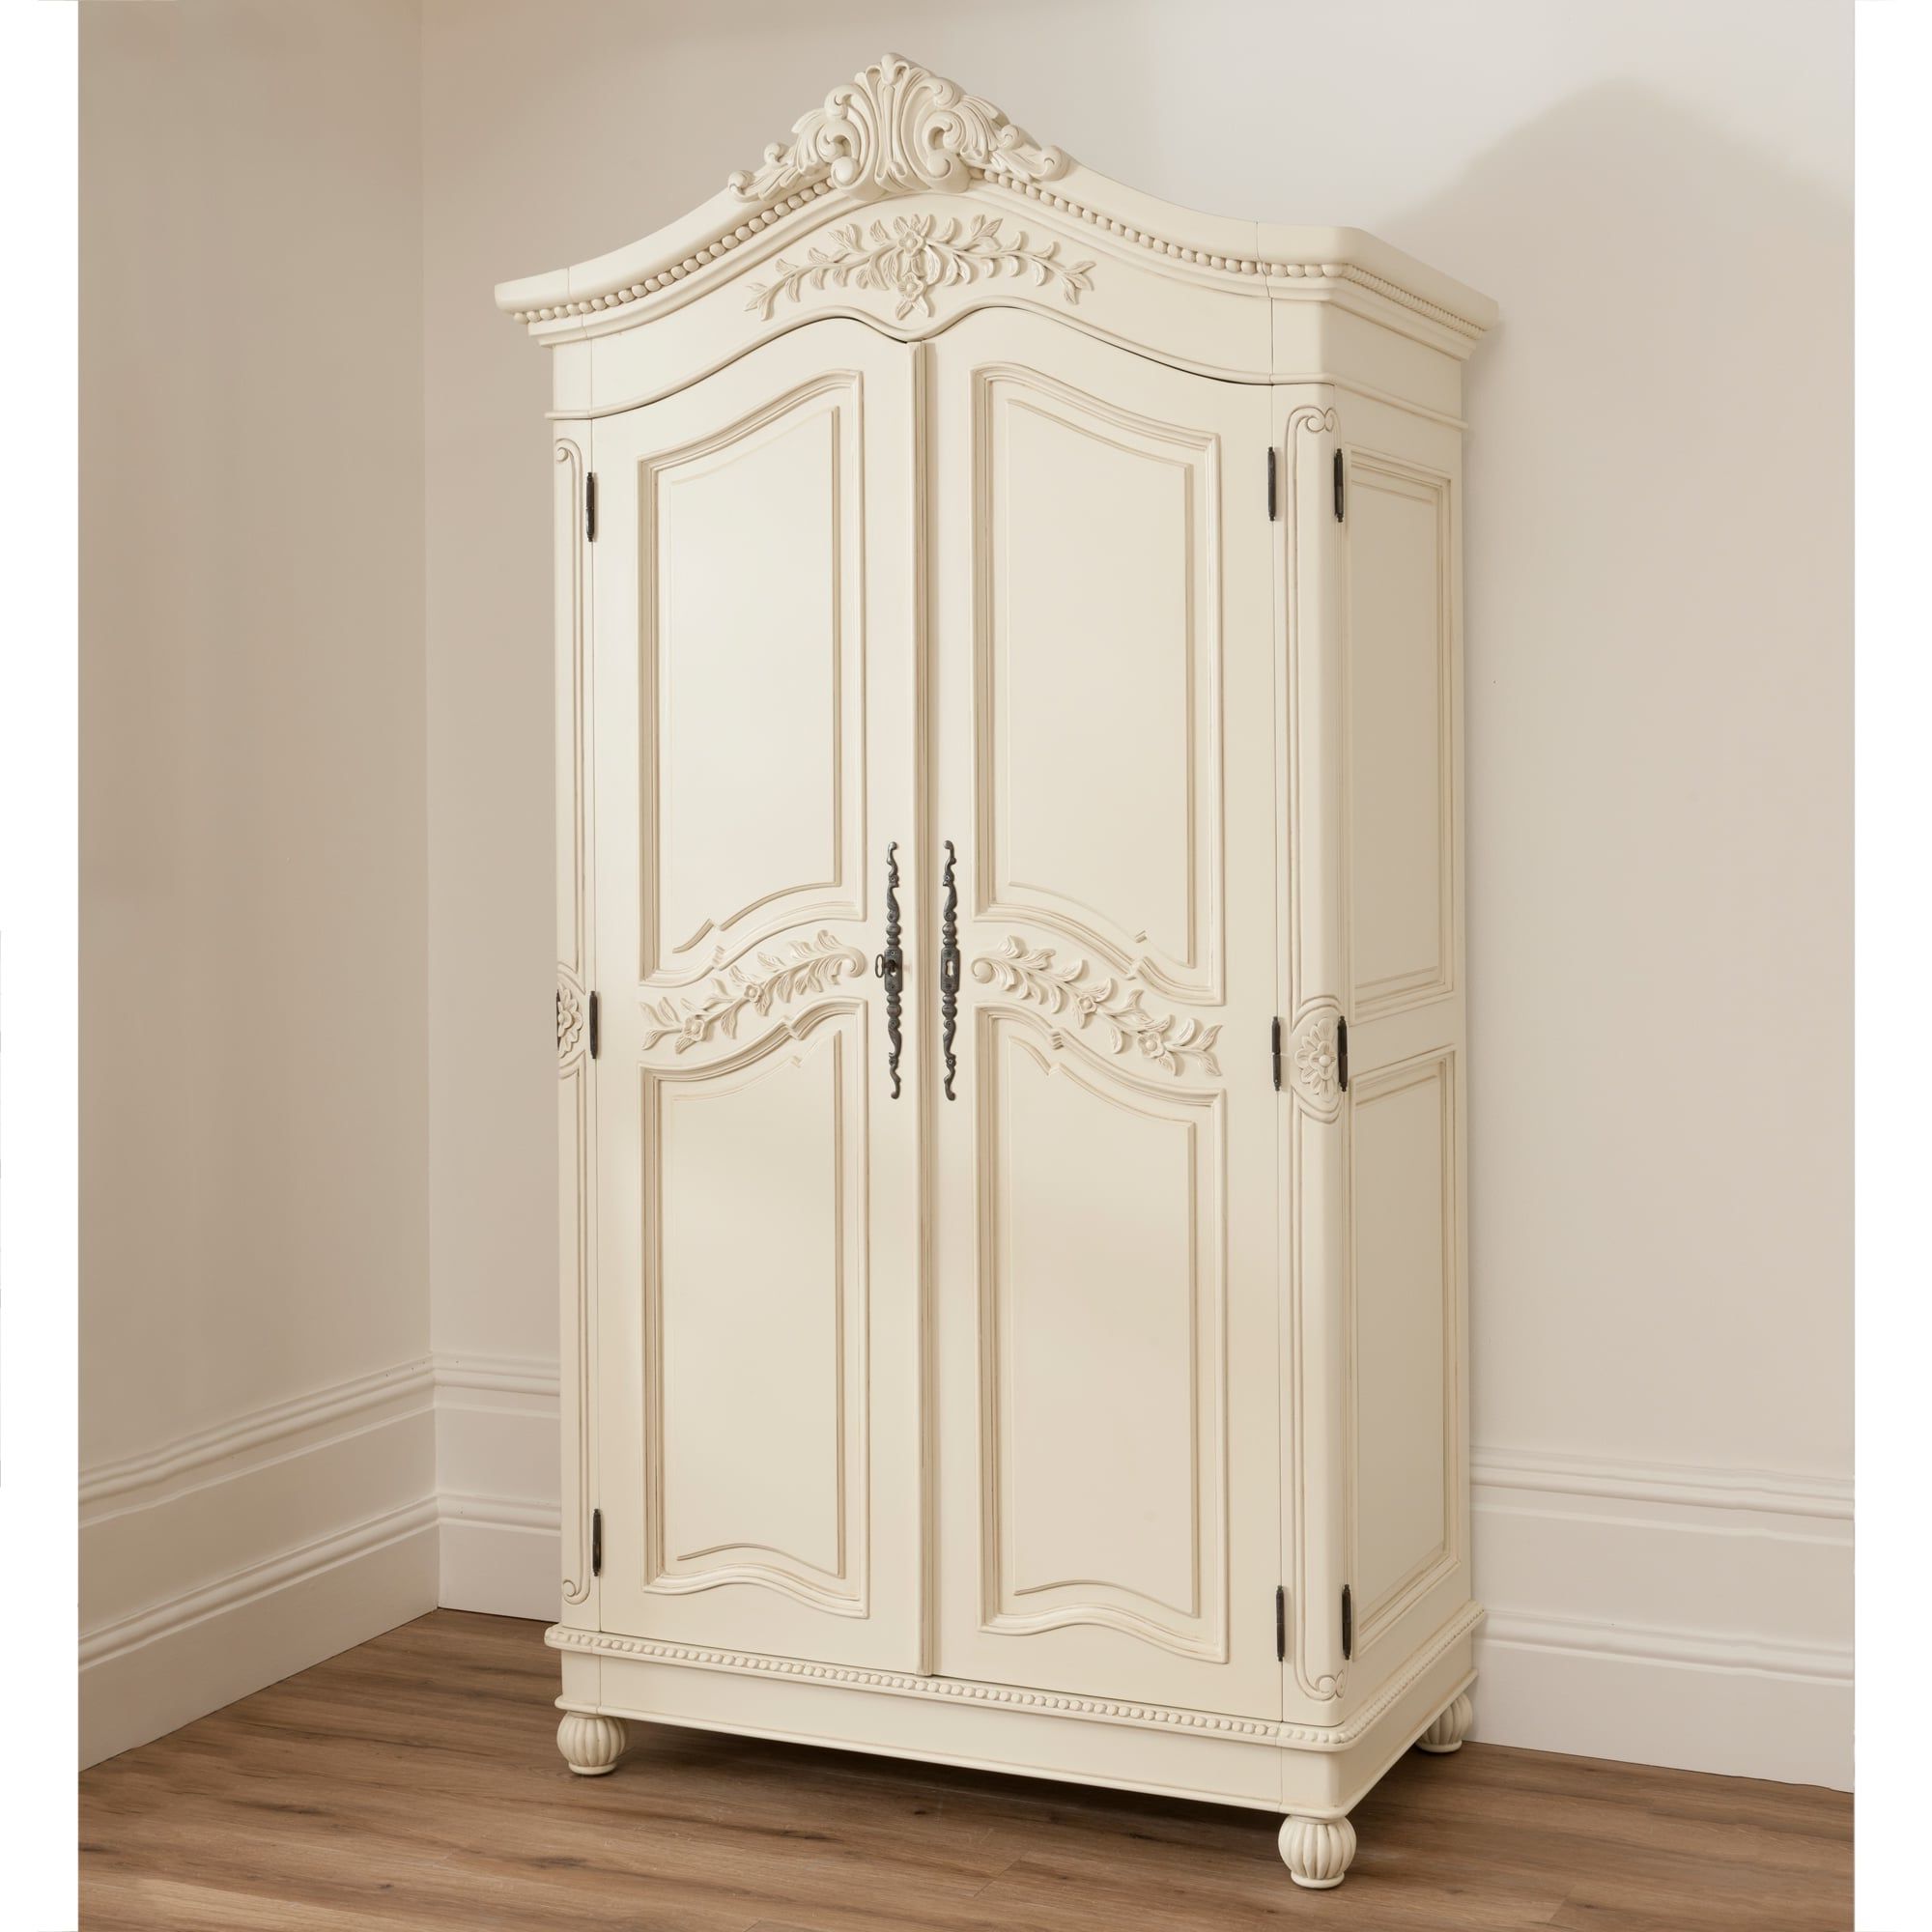 Bordeaux Ivory Shabby Chic Wardrobe | Shabby Chic Furniture Throughout Shabby Chic Wardrobes For Sale (Gallery 14 of 20)